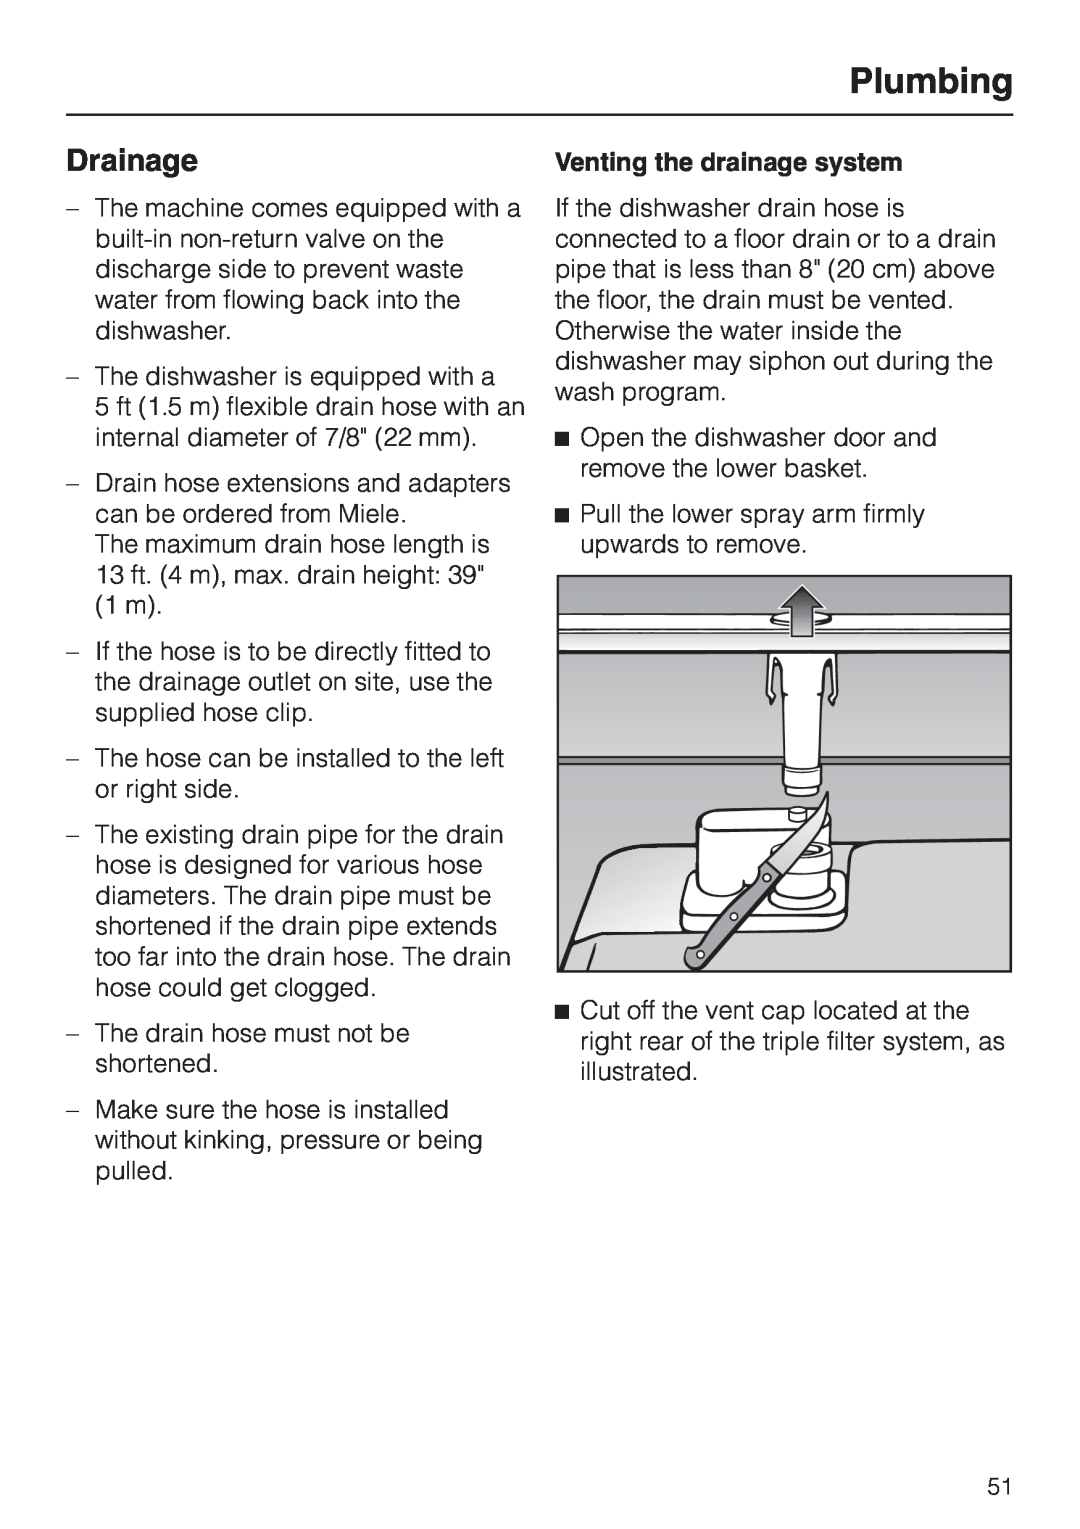 Miele G 2150, G 1150 operating instructions Drainage, Plumbing, Venting the drainage system 